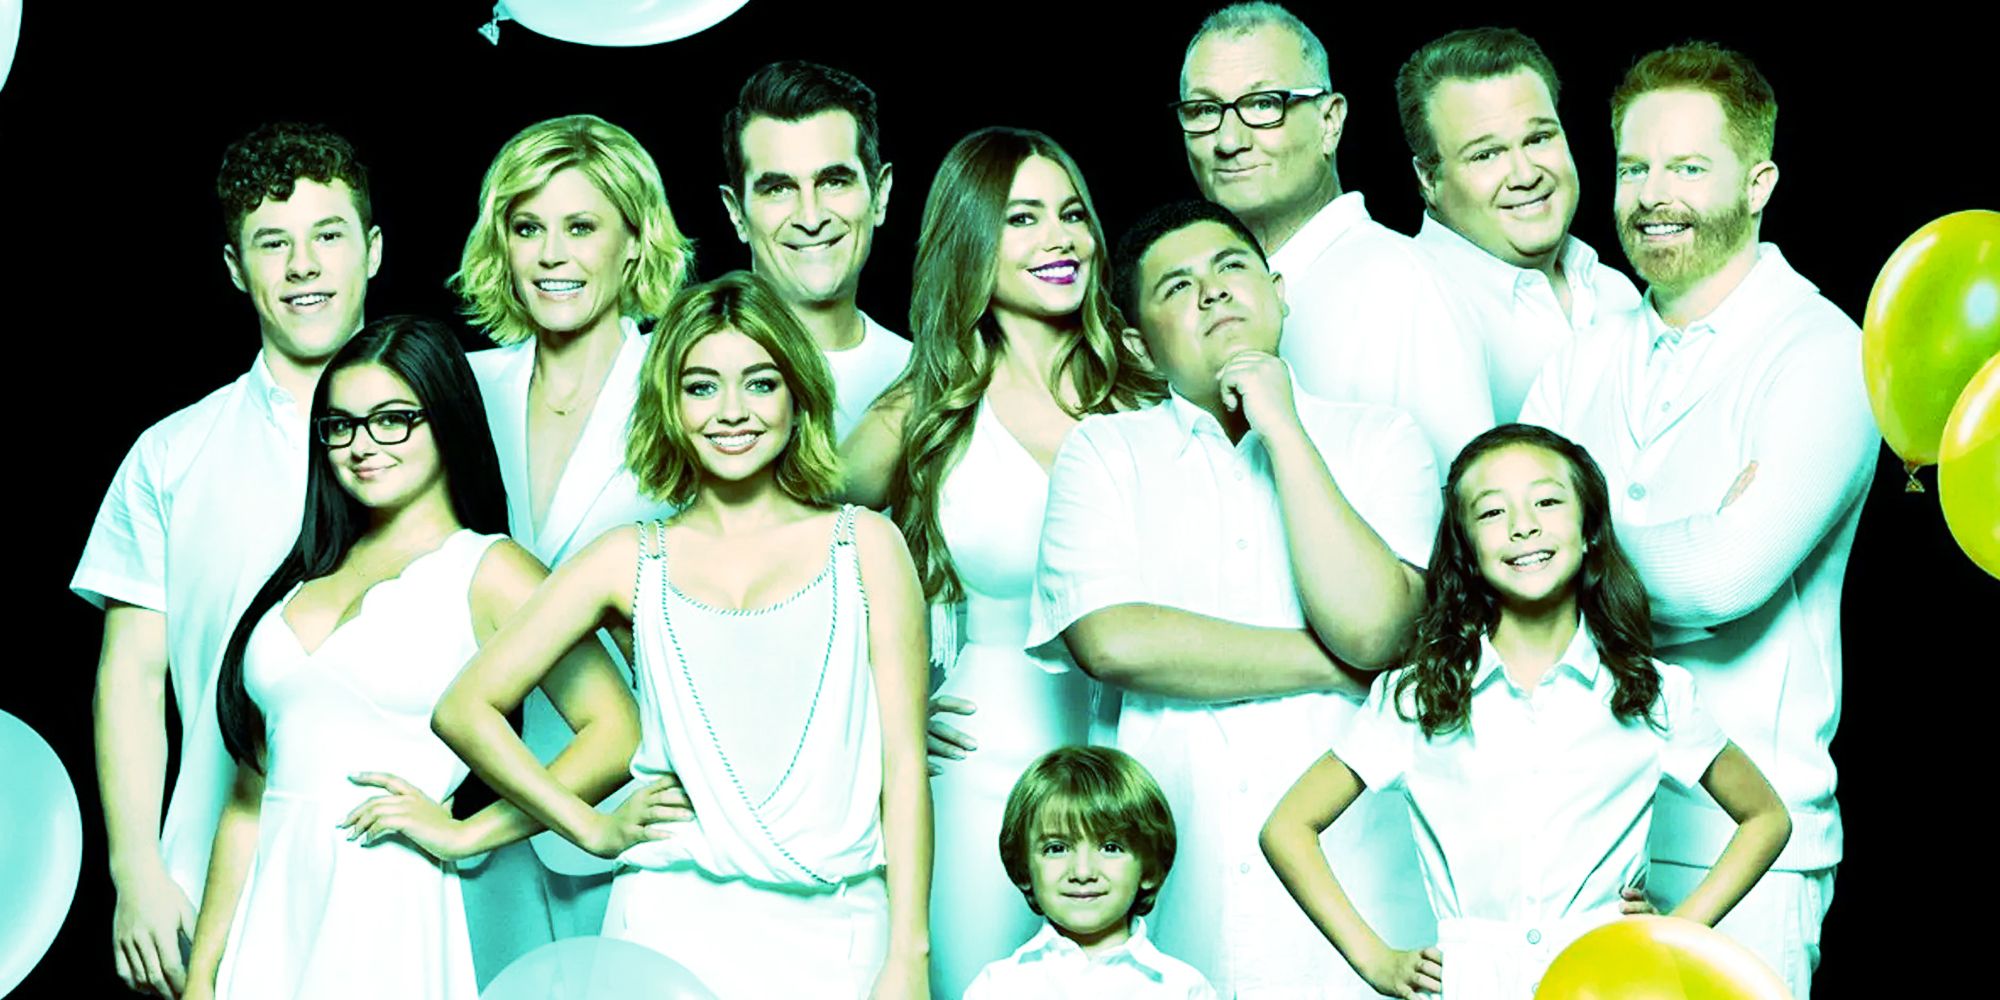 The cast of Modern Family toward the end of the show with a green tint